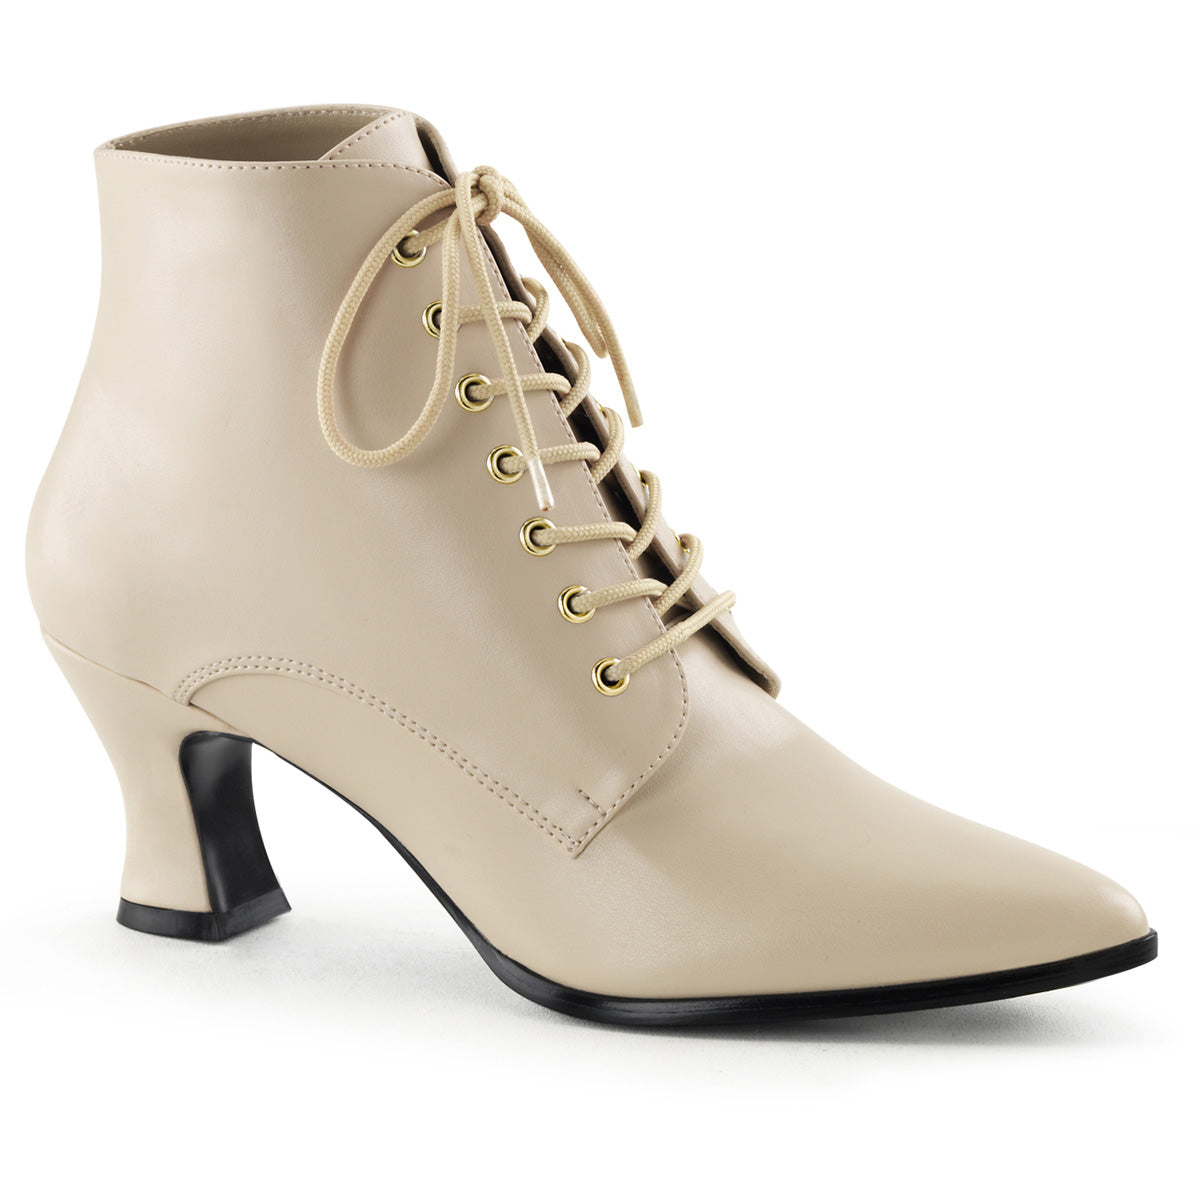 Victorian Ankle Boots Cream